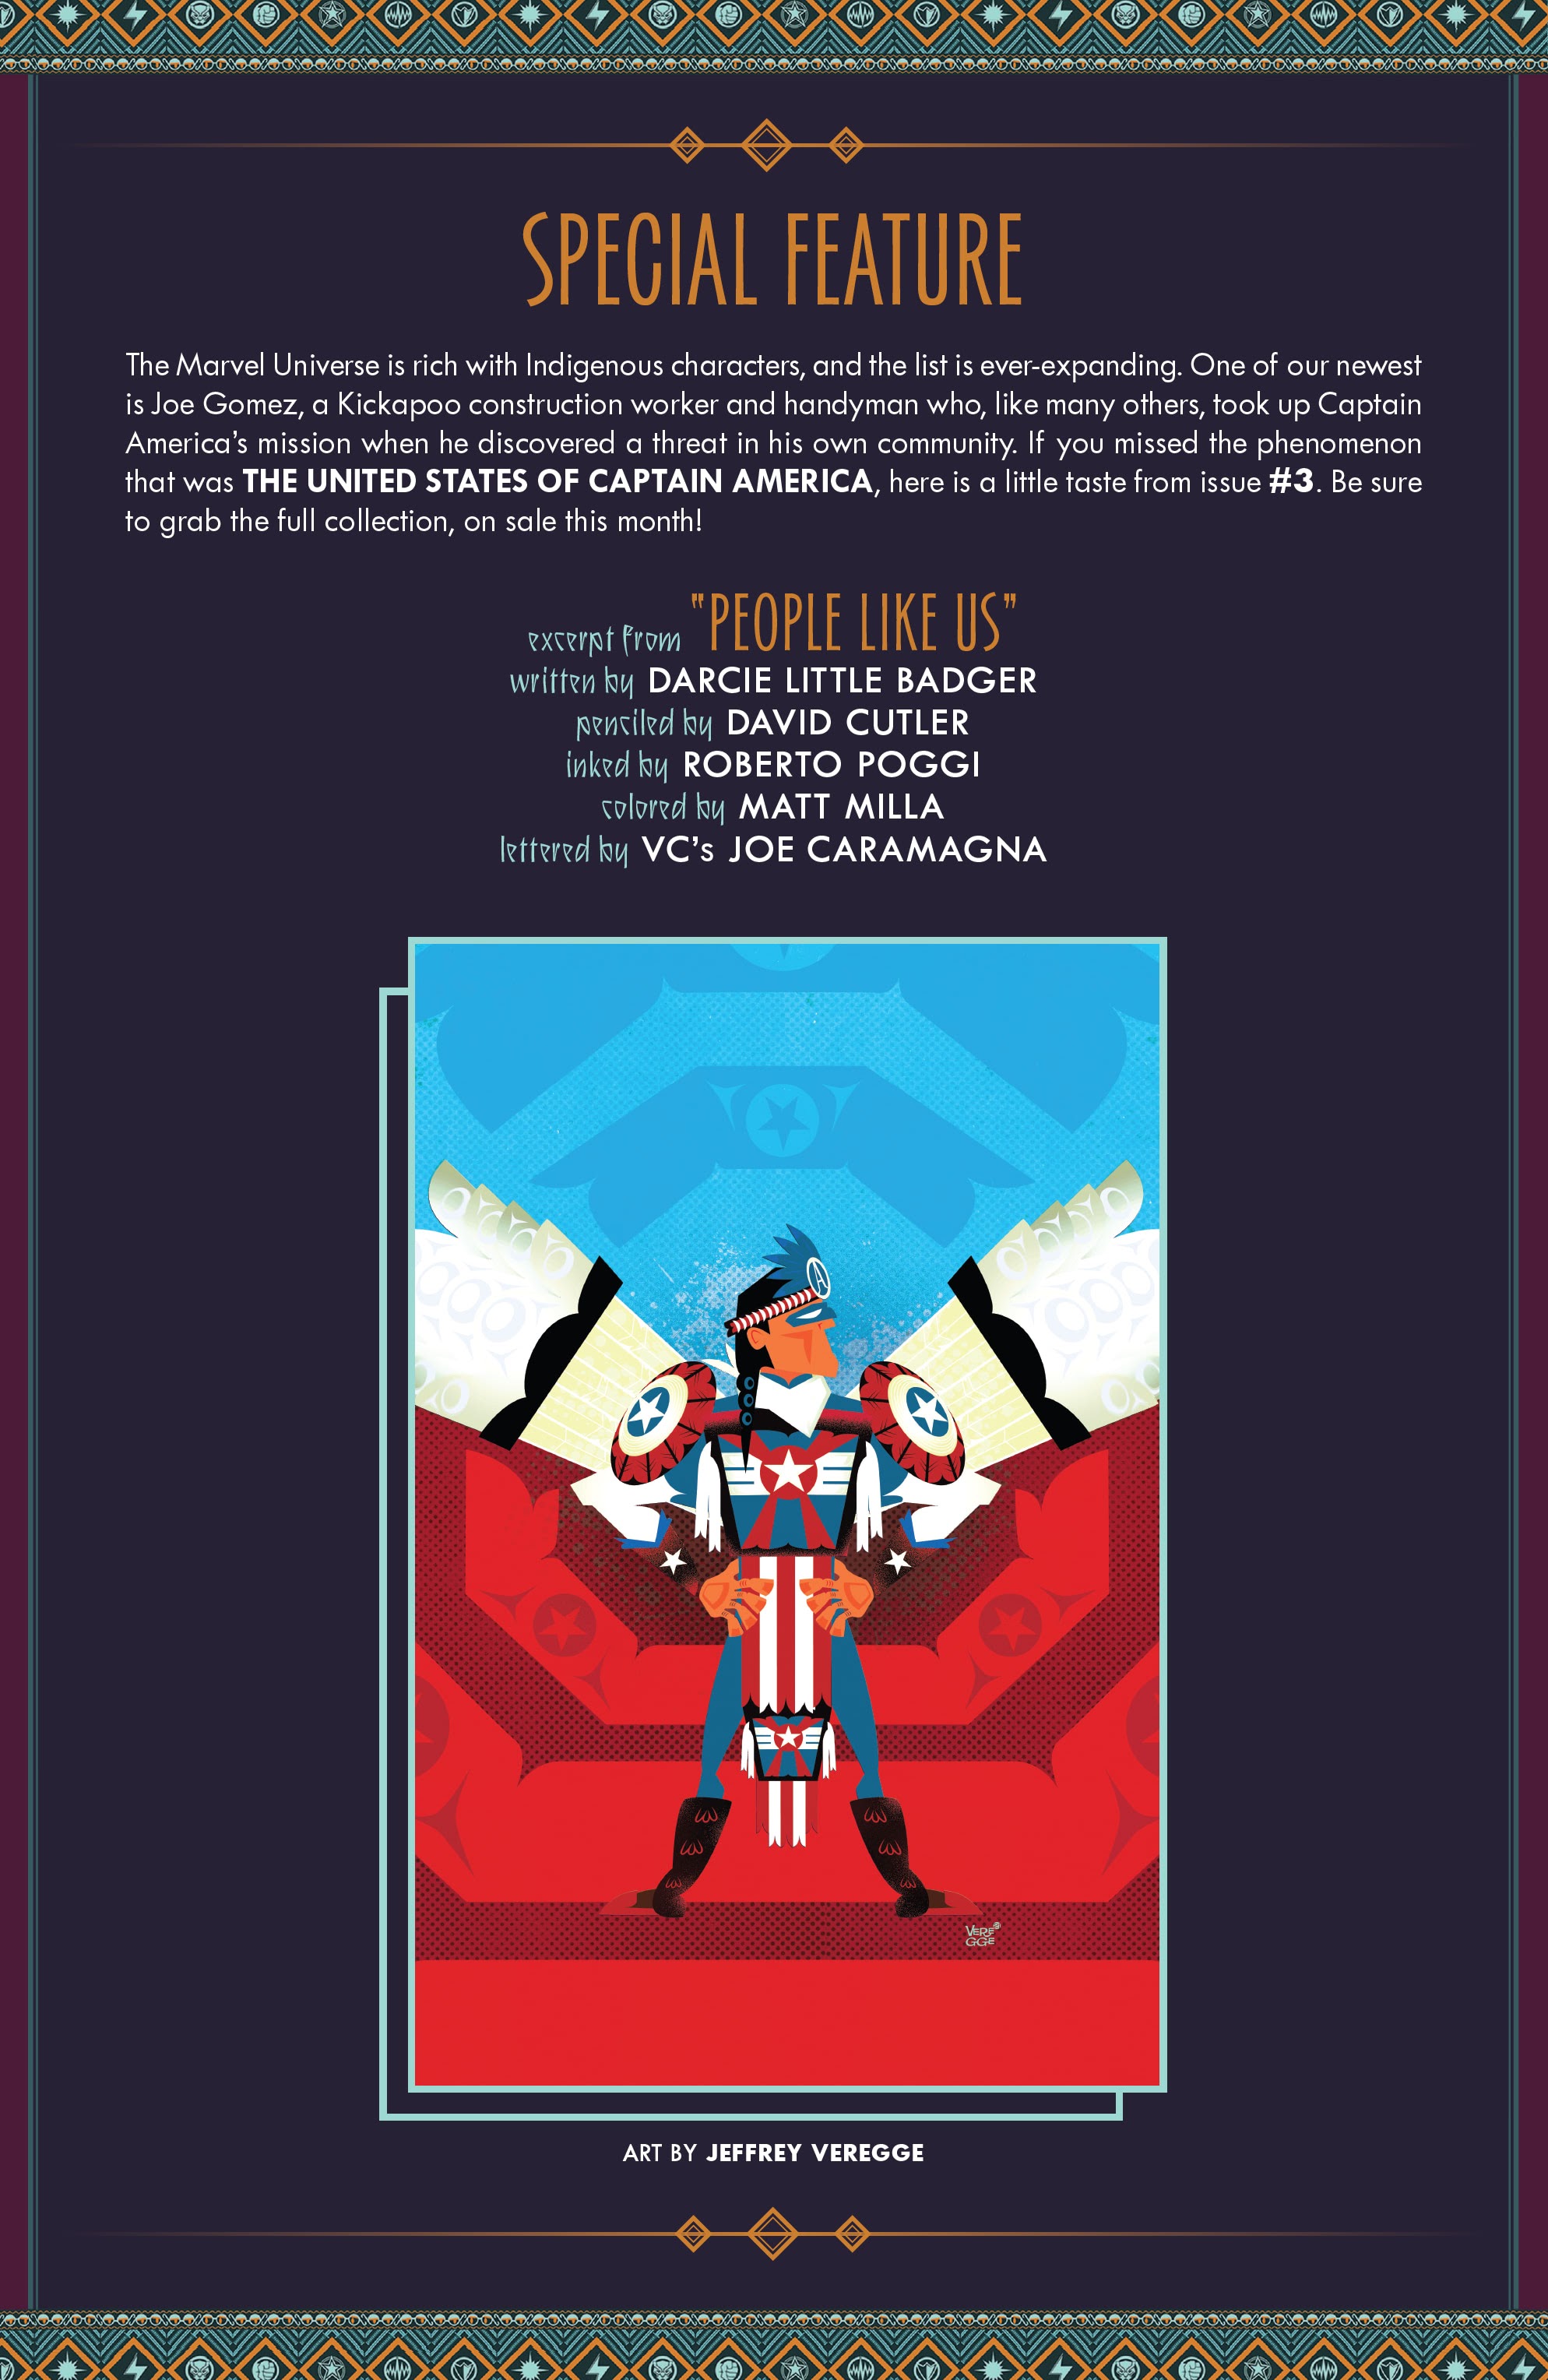 Read online Marvel's Voices: Heritage comic -  Issue # Full - 30